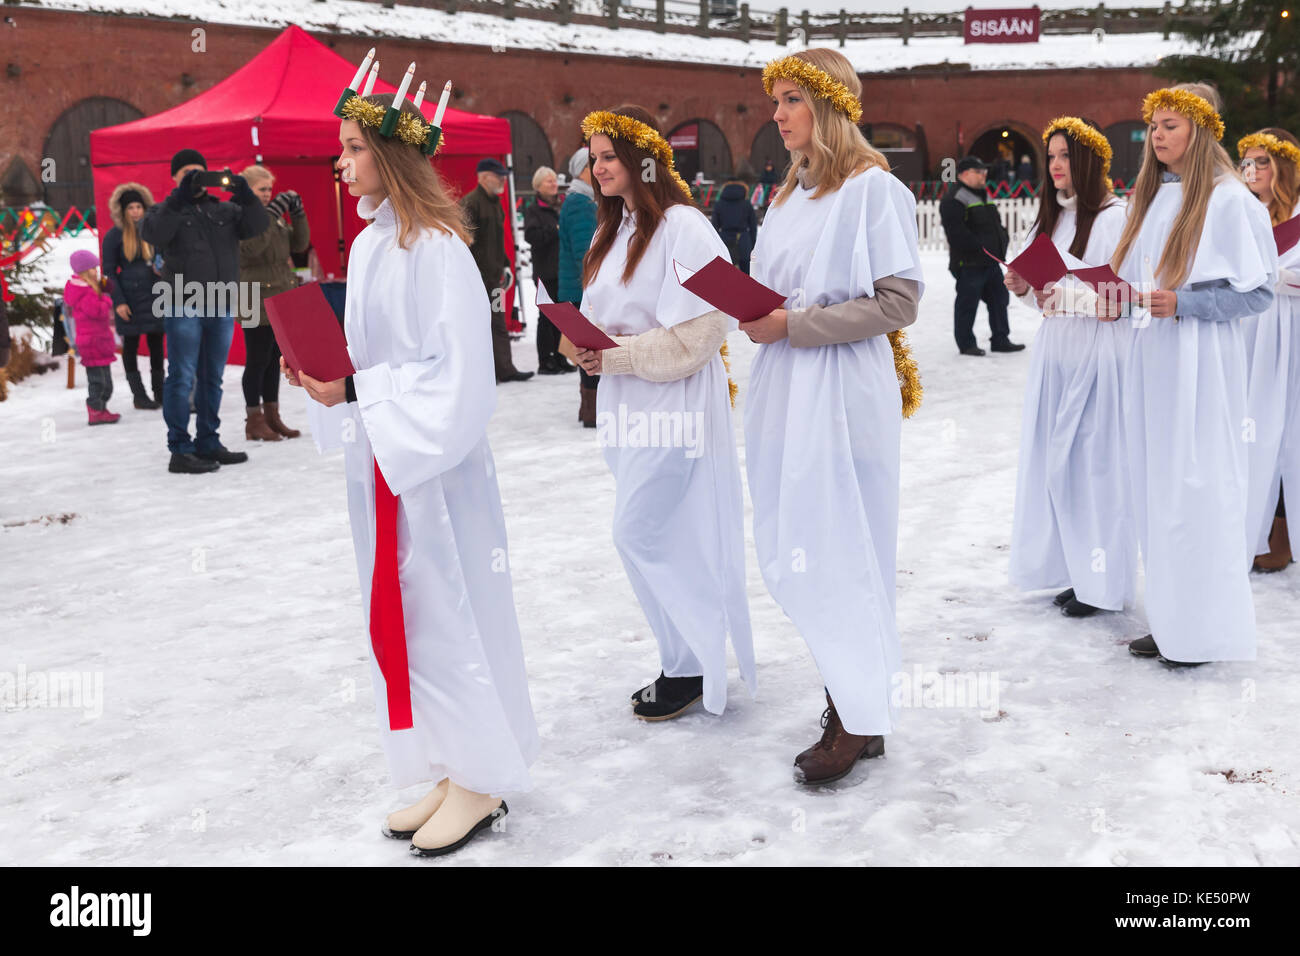 Hamina, Finland - December 13, 2014: choir of young Finnish girls goes to the Christmas fair Stock Photo